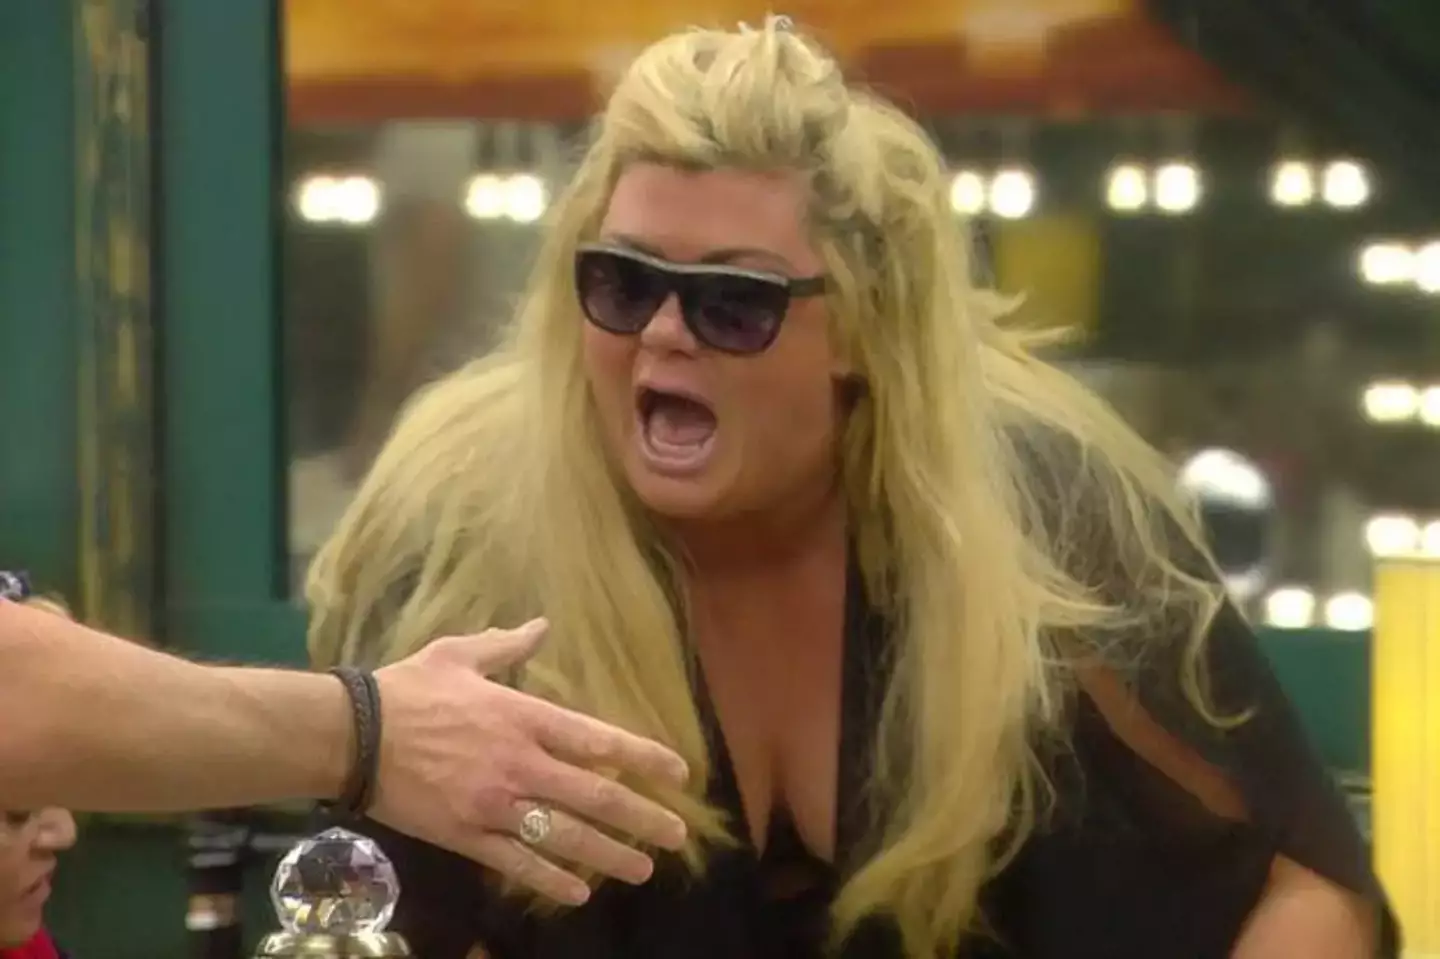 Gemma Collins previously starred in the celebrity series.